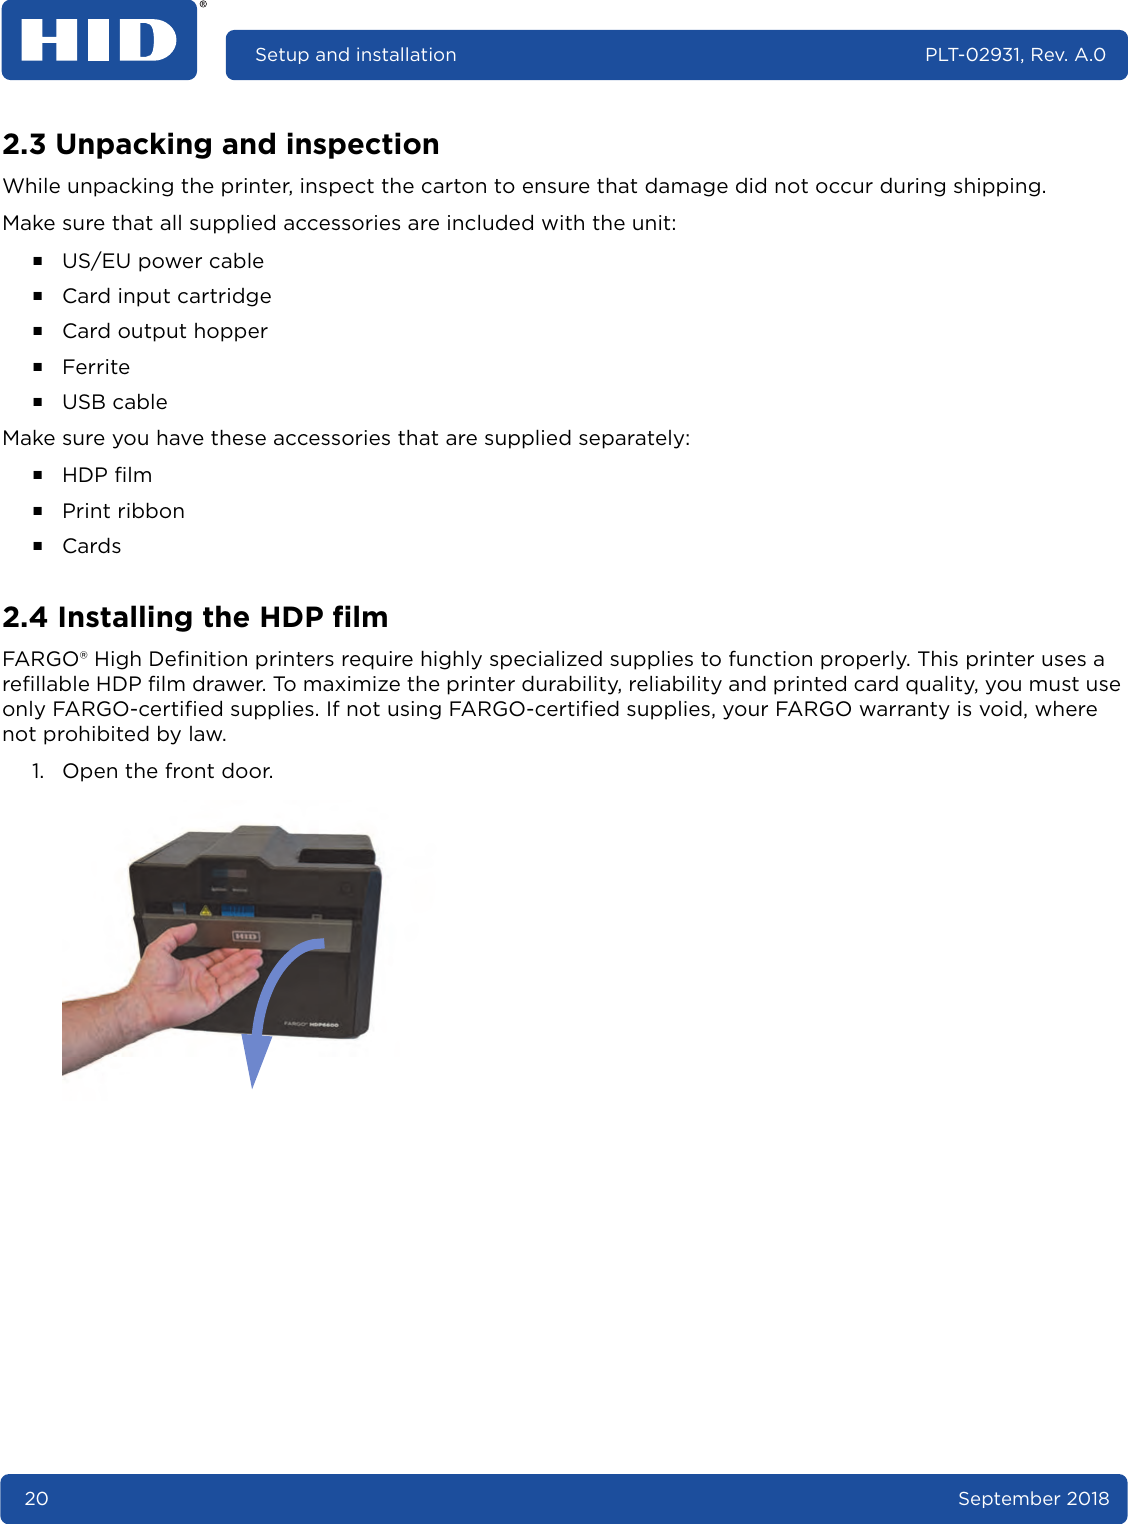 20 September 2018Setup and installation PLT-02931, Rev. A.02.3 Unpacking and inspectionWhile unpacking the printer, inspect the carton to ensure that damage did not occur during shipping.Make sure that all supplied accessories are included with the unit:႑US/EU power cable႑Card input cartridge႑Card output hopper႑Ferrite႑USB cableMake sure you have these accessories that are supplied separately:႑HDP film႑Print ribbon႑Cards2.4 Installing the HDP filmFARGO® High Definition printers require highly specialized supplies to function properly. This printer uses a refillable HDP film drawer. To maximize the printer durability, reliability and printed card quality, you must use only FARGO-certified supplies. If not using FARGO-certified supplies, your FARGO warranty is void, where not prohibited by law.1. Open the front door.